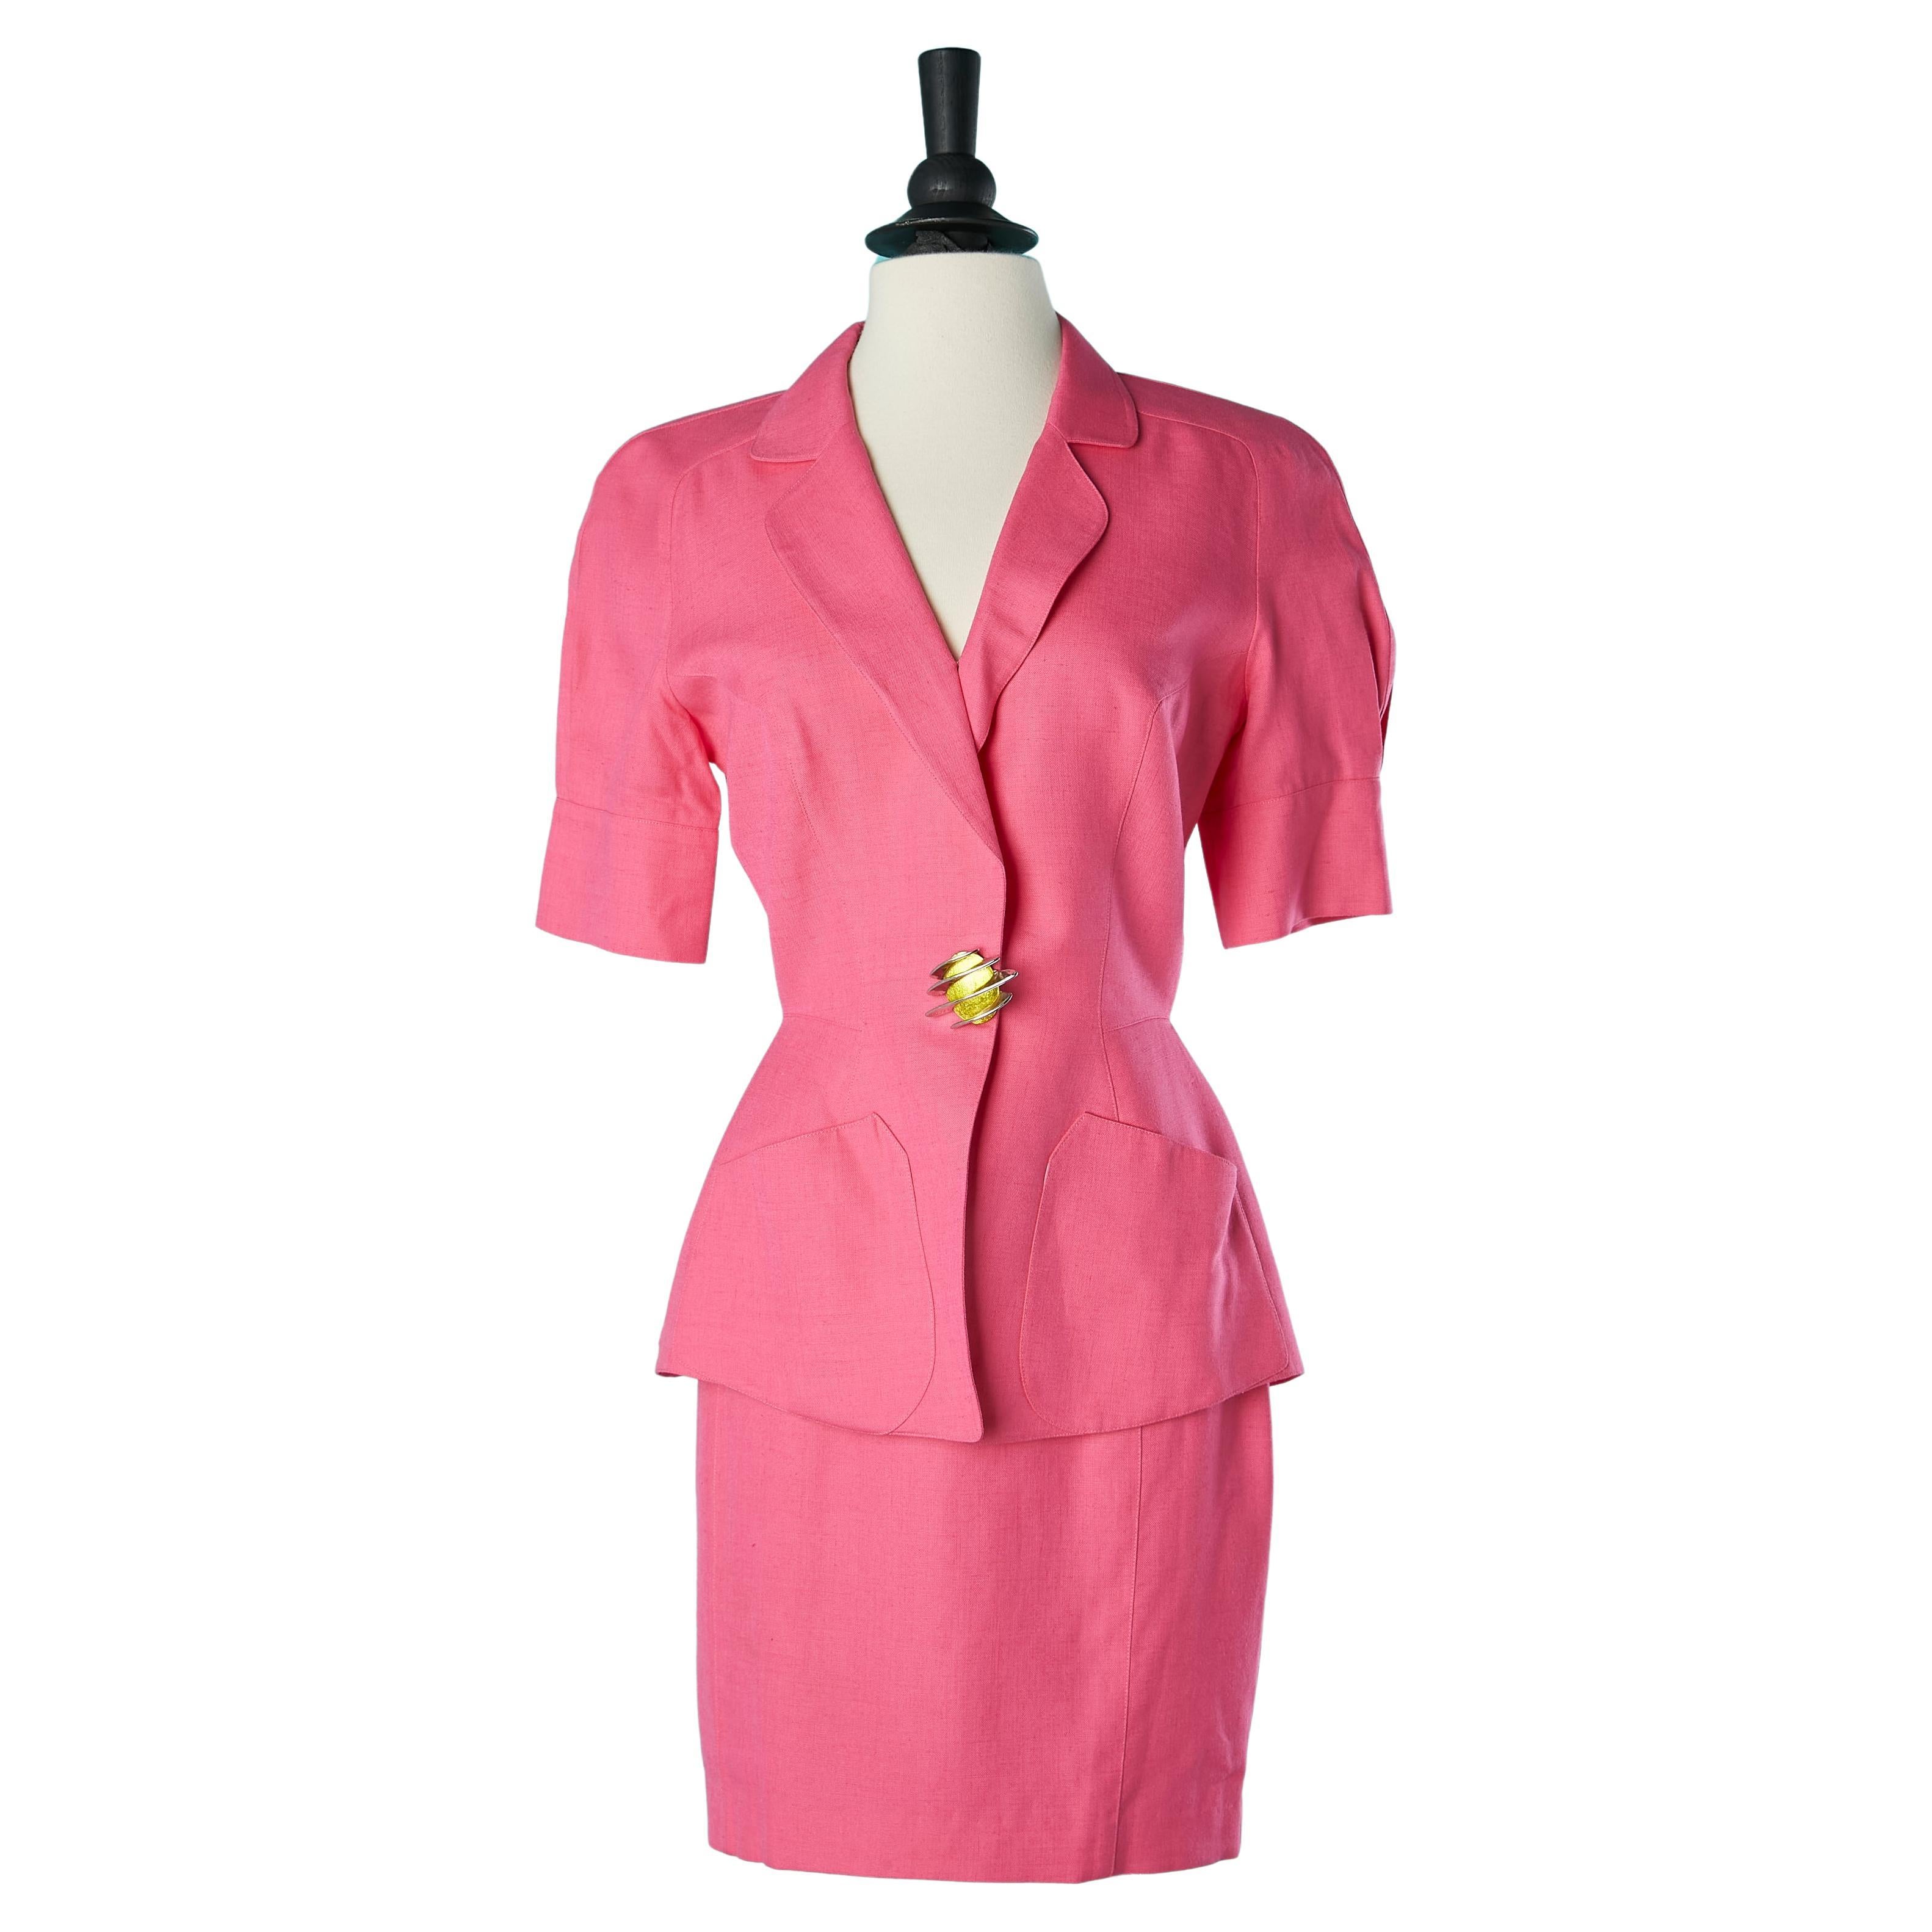 Pink skirt-suit with short sleeves and jewelery cabochon Thierry Mugler 